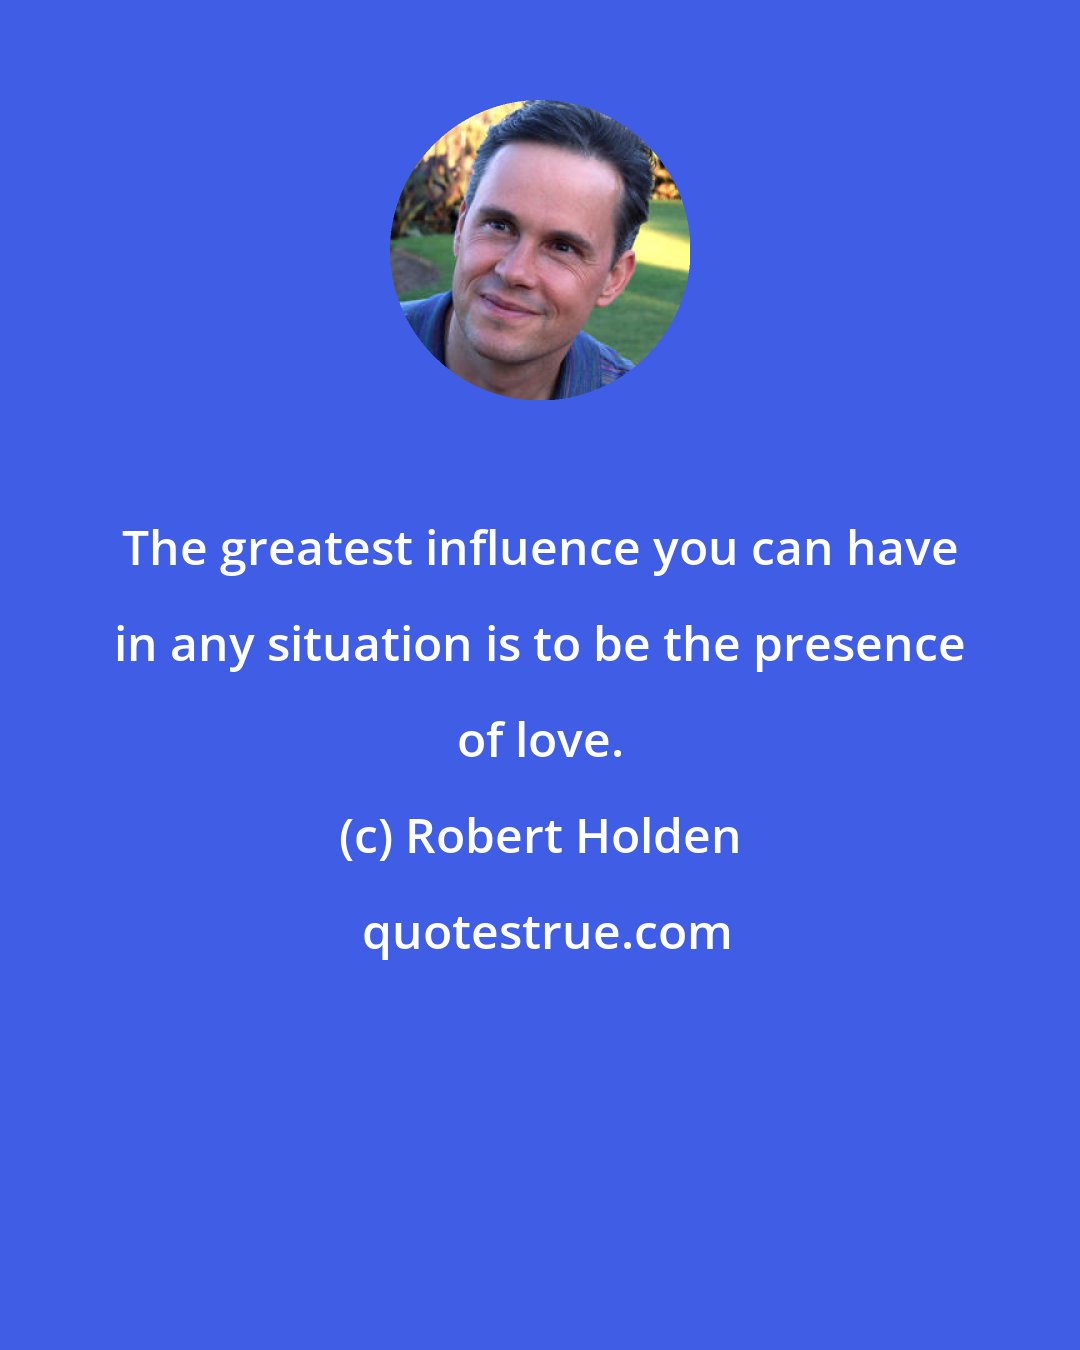 Robert Holden: The greatest influence you can have in any situation is to be the presence of love.